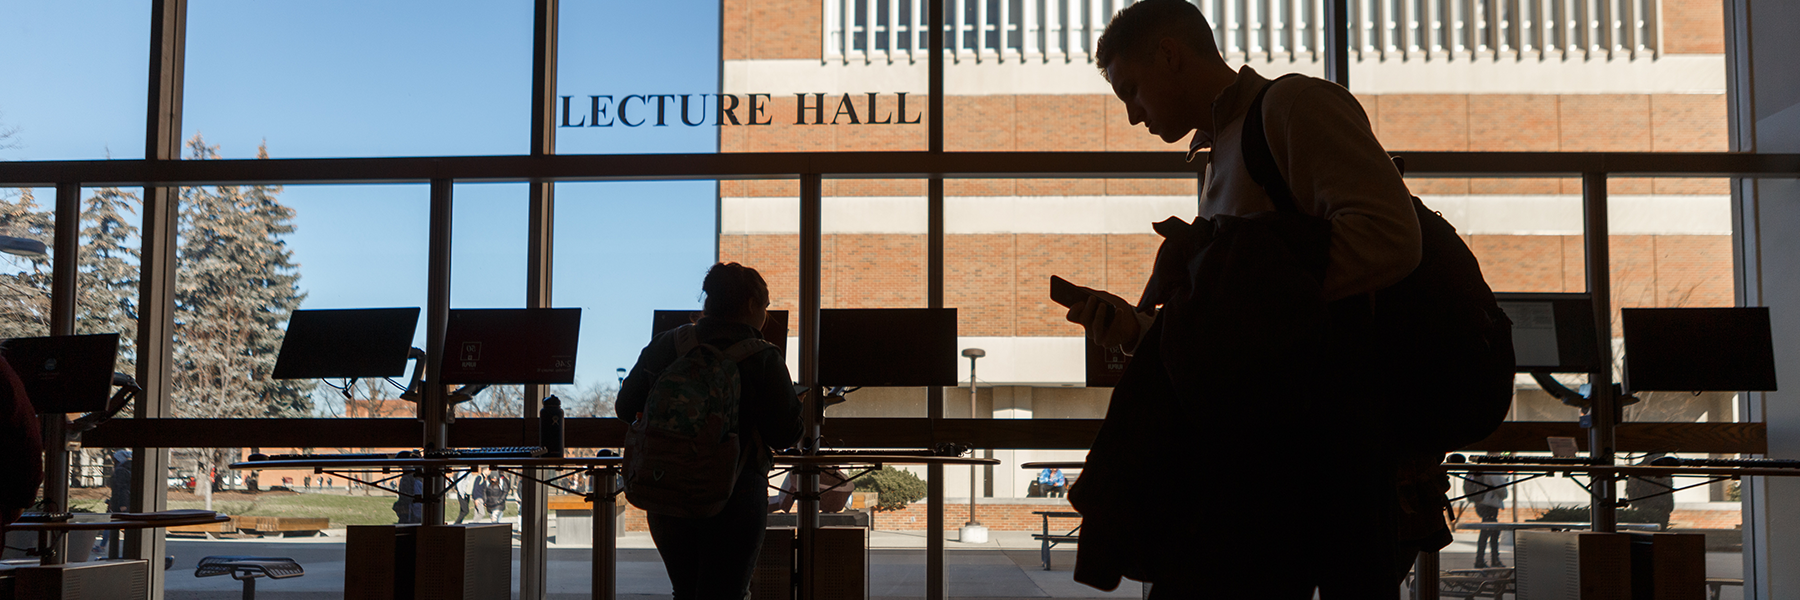 A man on a phone walks through the Lecture Hall building